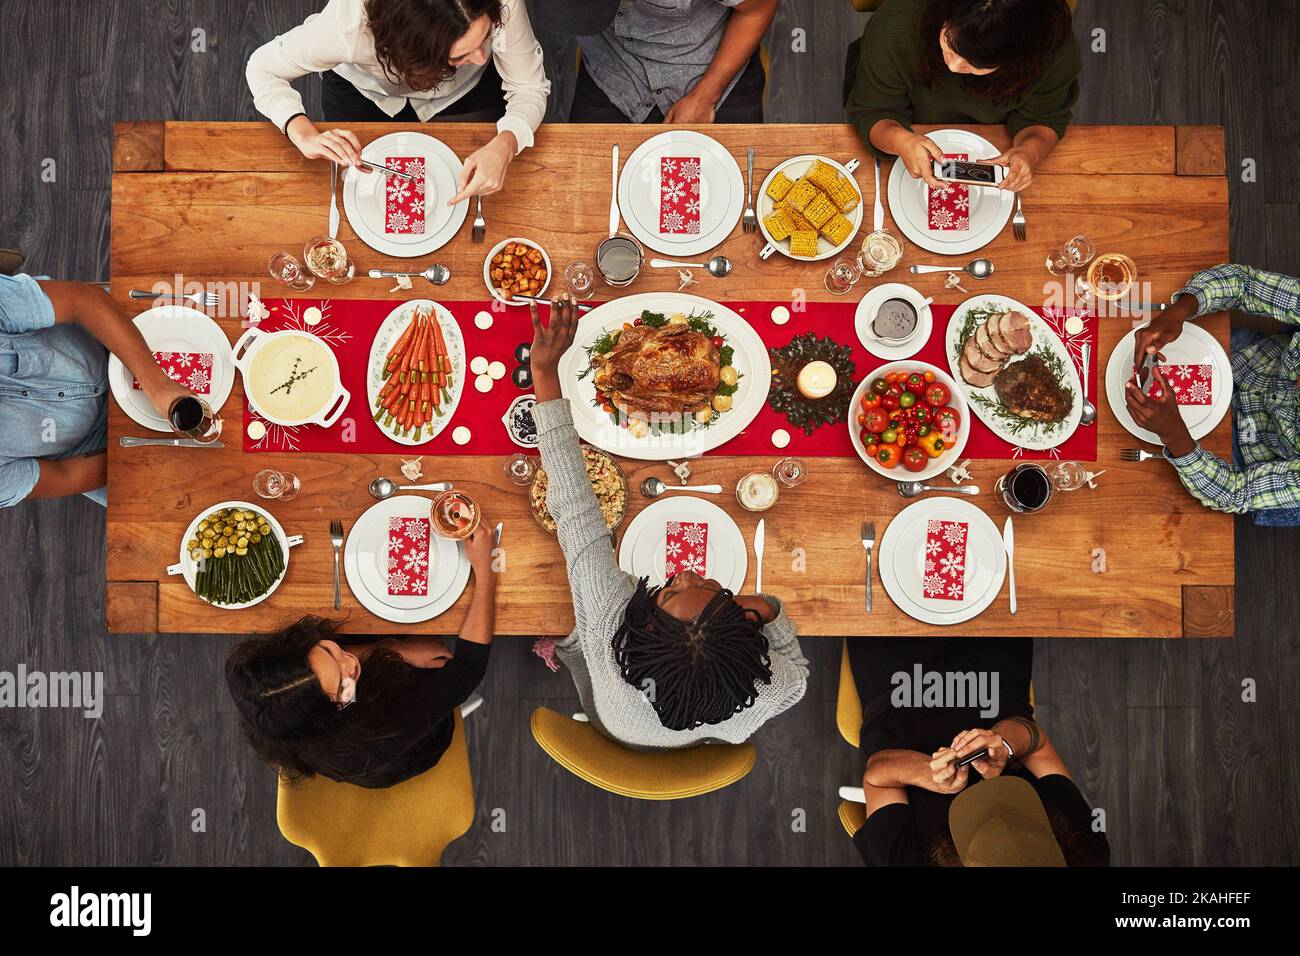 It wouldnt be a gathering without food. a group of people sitting together at a dining table ready to eat. Stock Photo